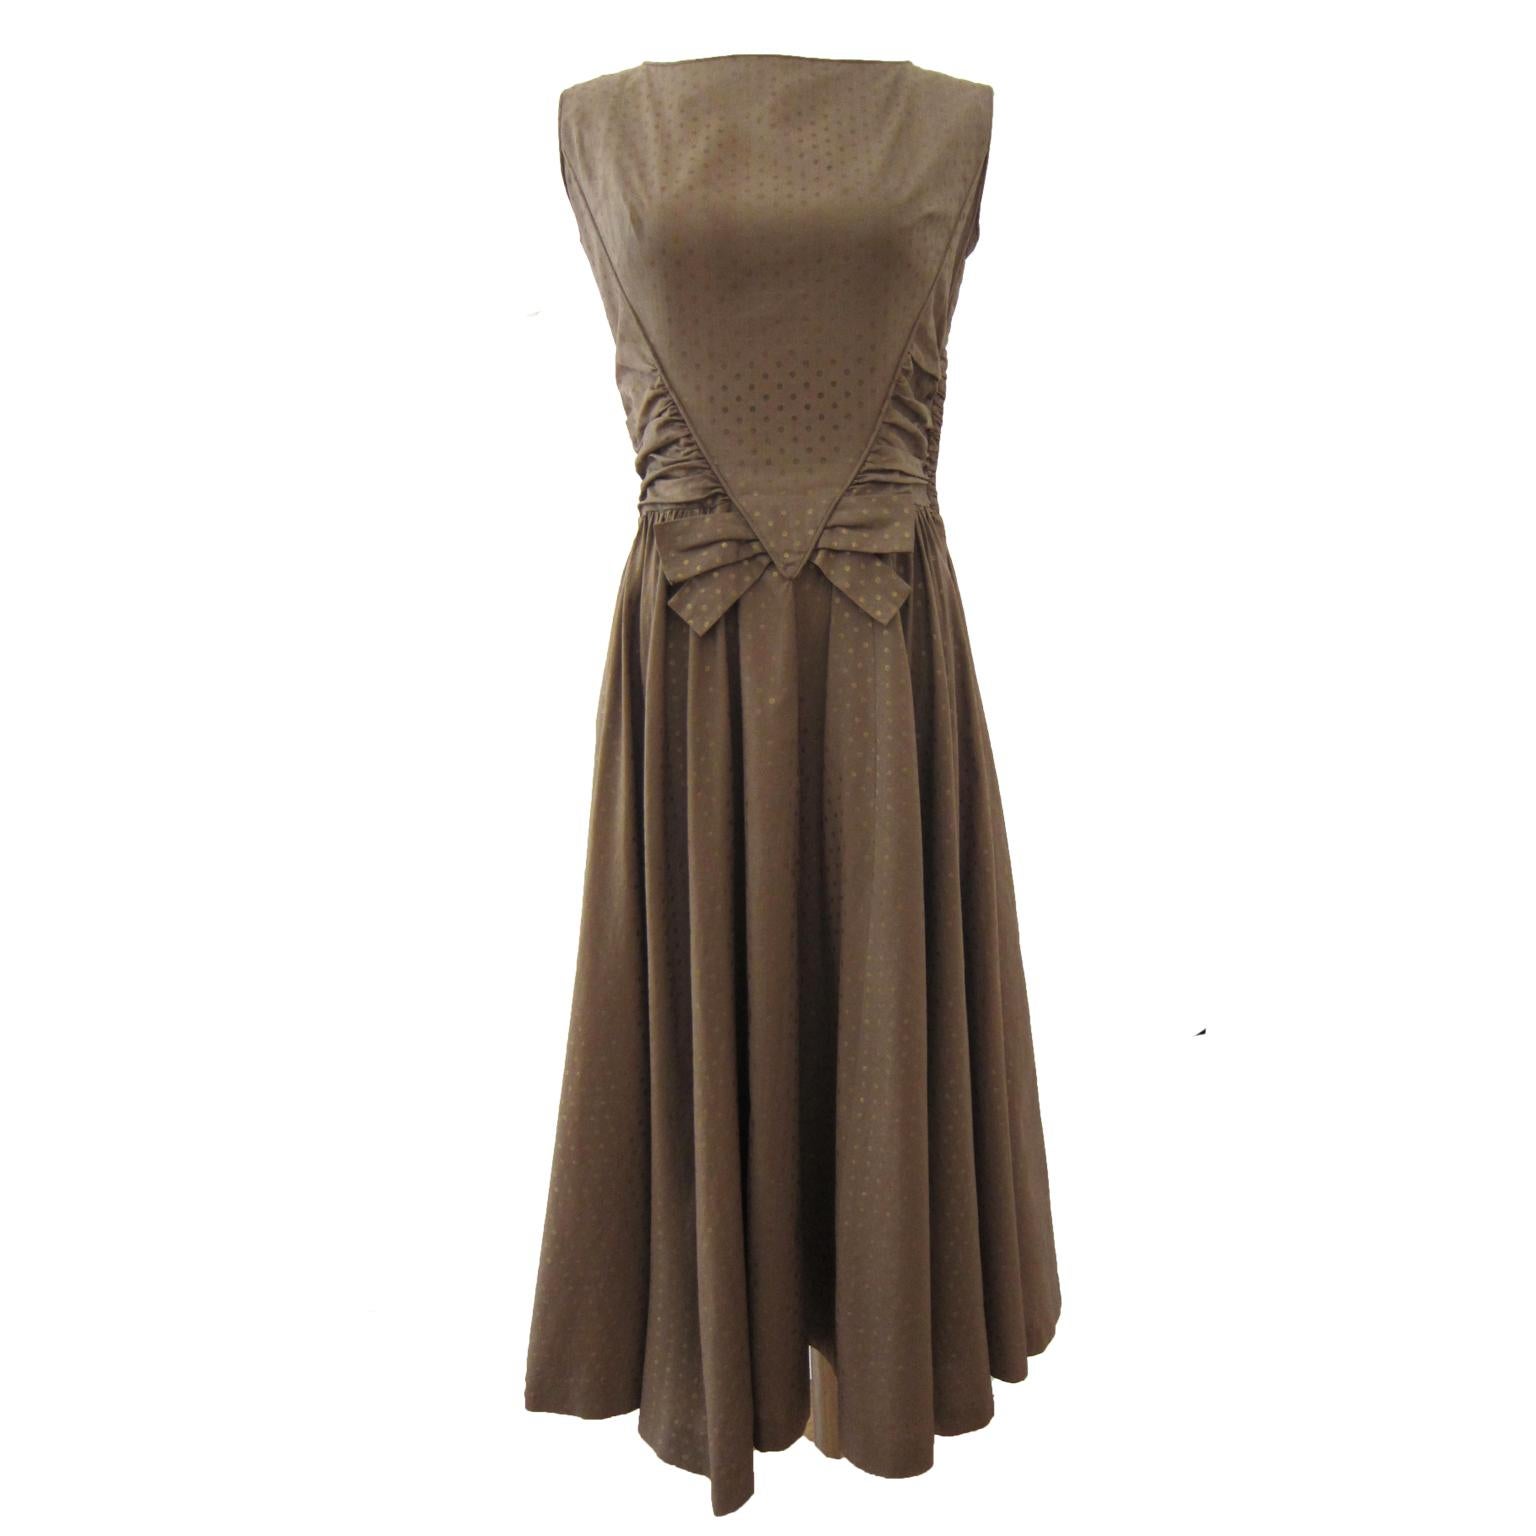 Iconic Ann Marsh New York golden beige dress from 1950s.
Beautifully gathered detail, piping finishing, a side zip opening.
Fits like US 6, EU 36
Measurements ; (flat lay)
Length : 115 cm
Underarm : 48 cm
Waist : 37 cm